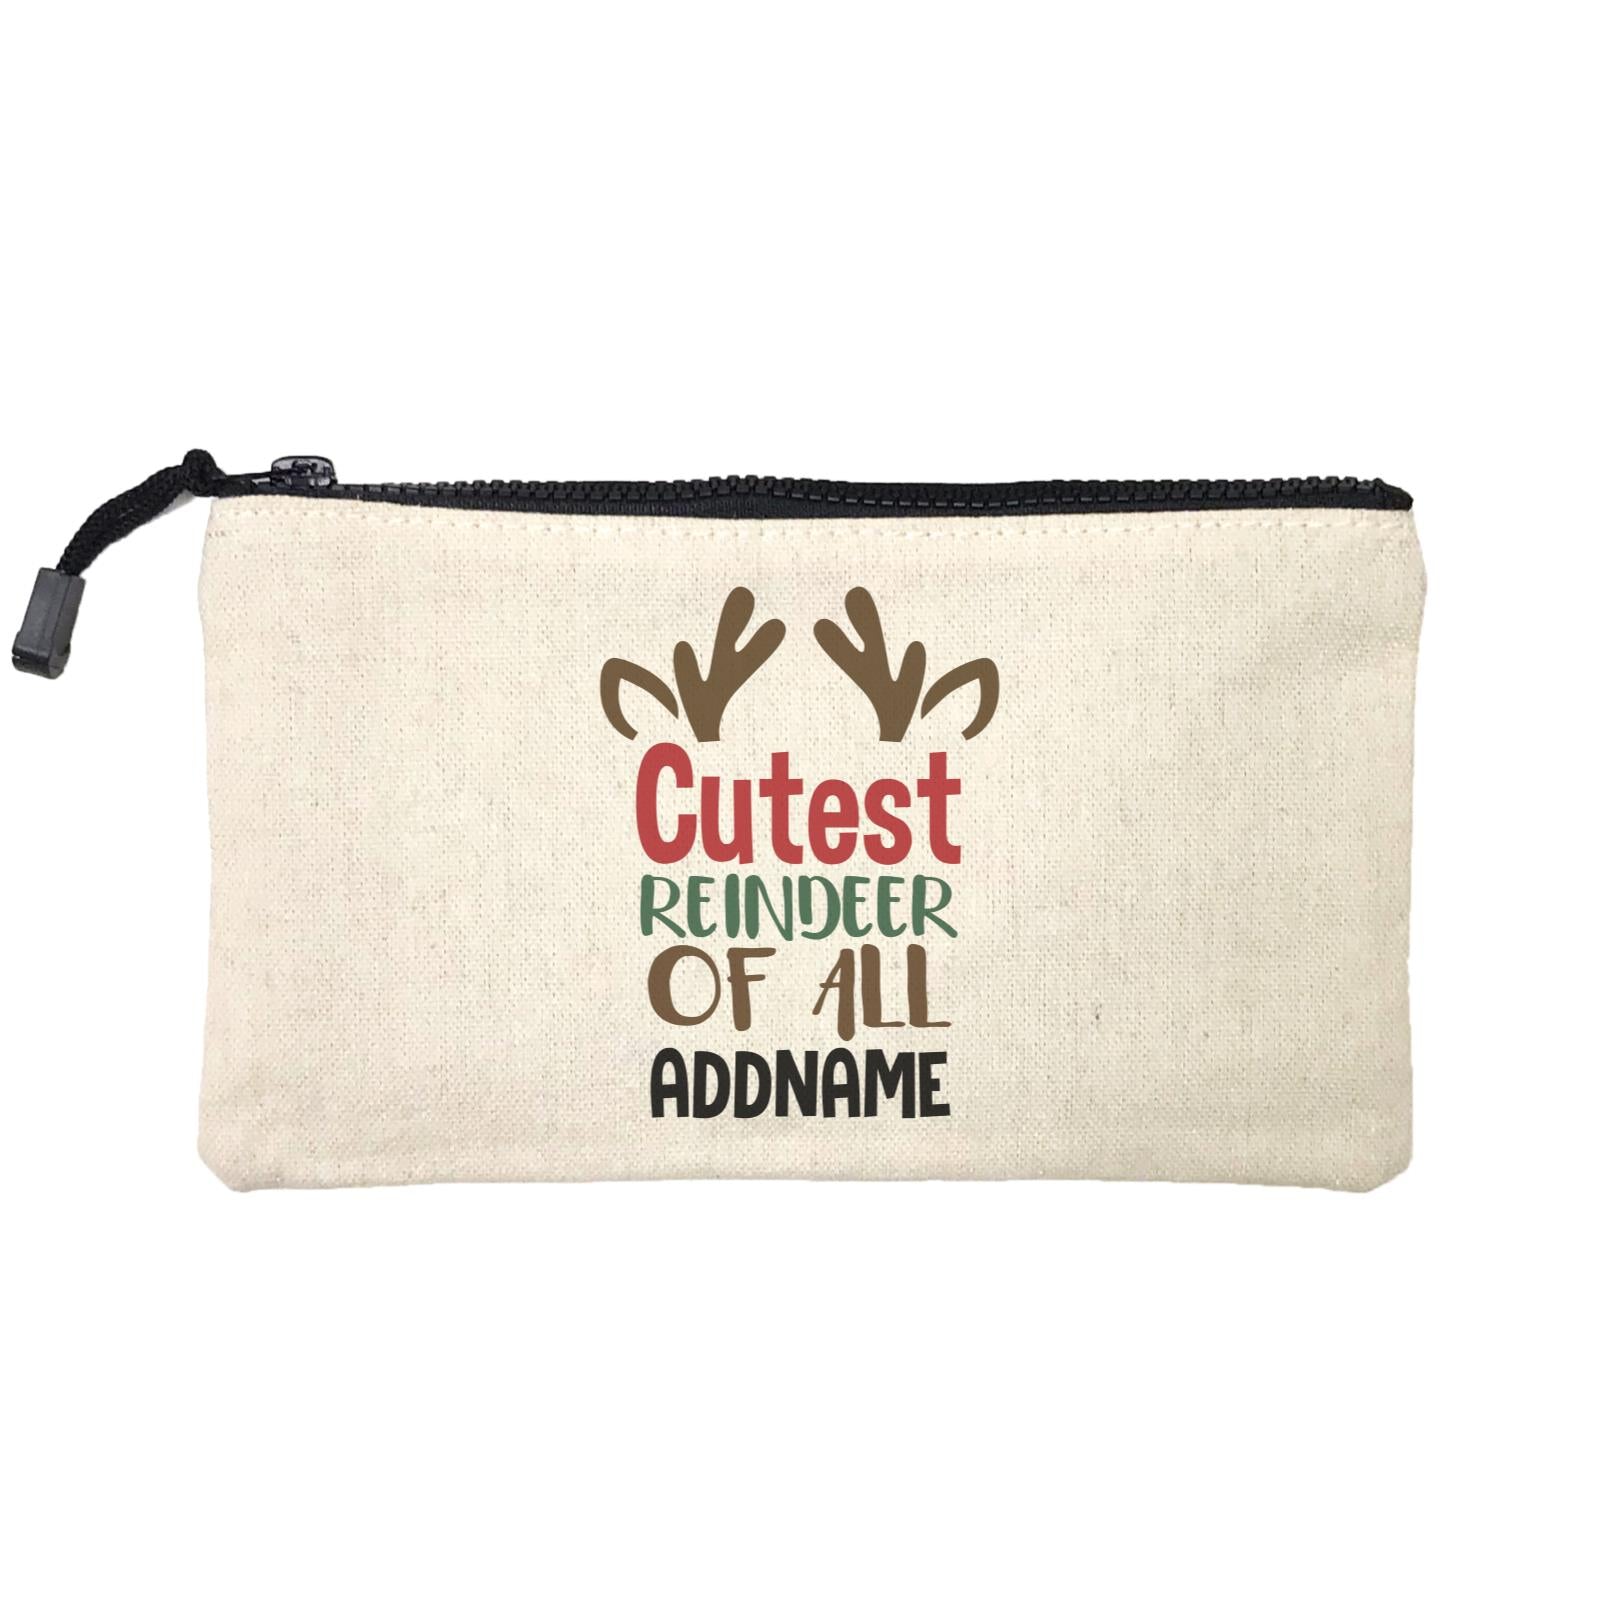 Xmas Cutest Reindeer of All Mini Accessories Stationery Pouch